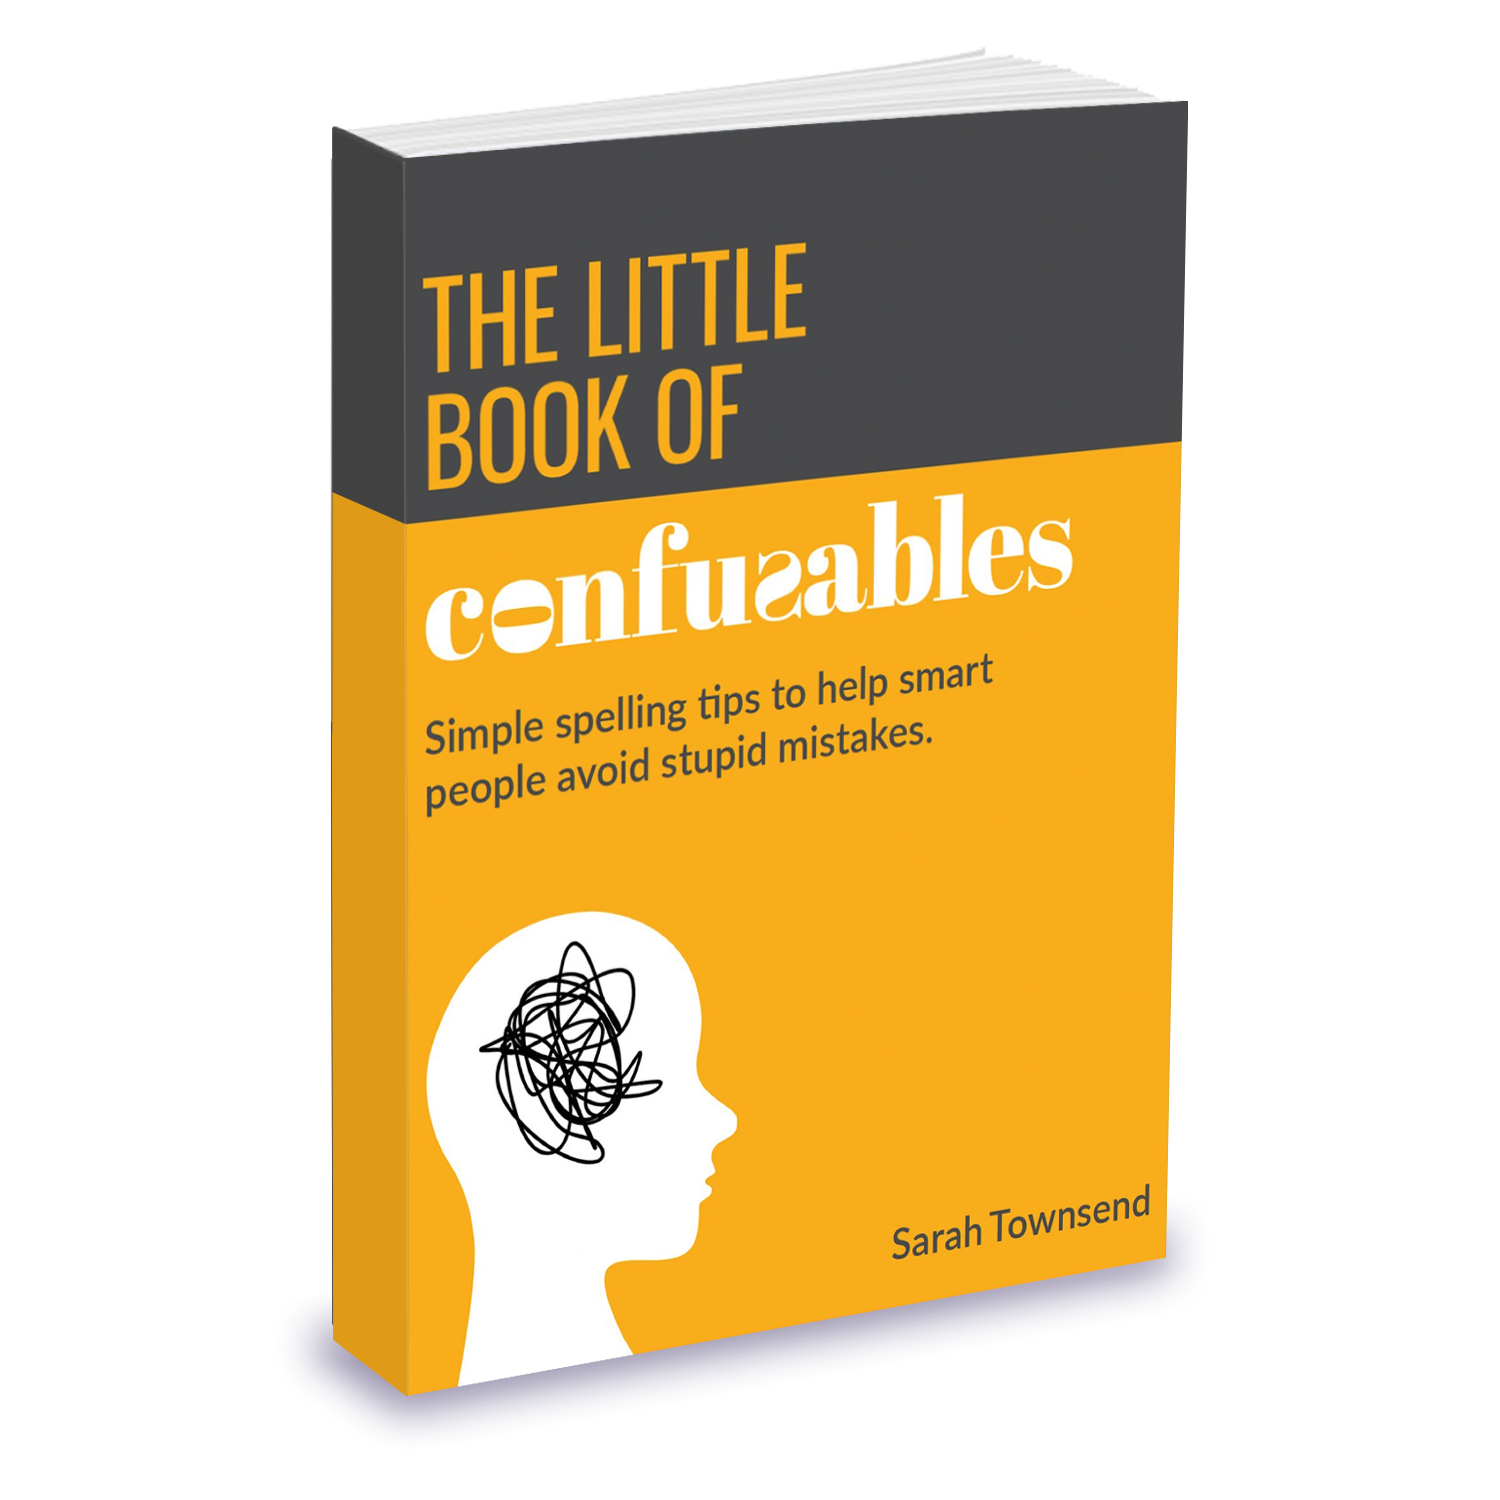 Photograph of The Little Book of Confusables: simple spelling tips to help smart people avoid stupid mistakes. Written by Sarah Townsend